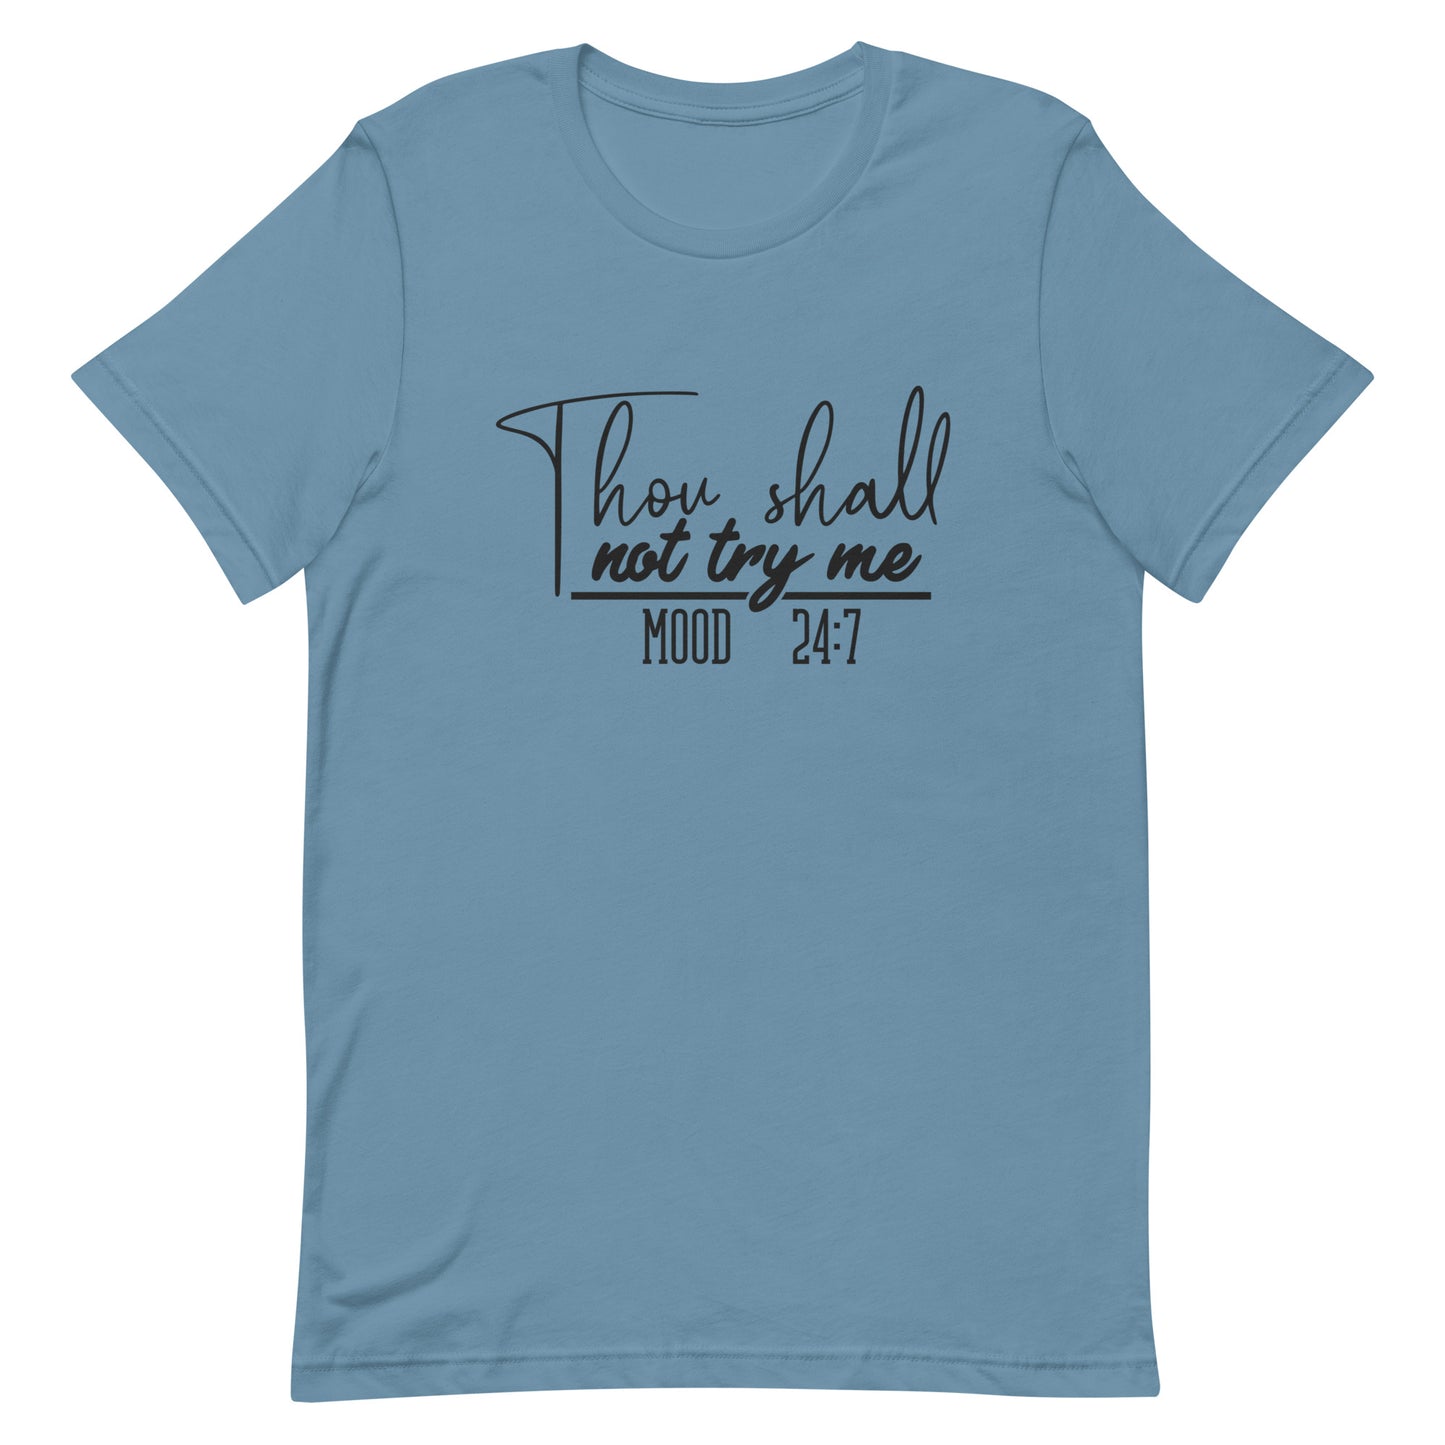 Thall Shall Not Try Me Mood 24:7 Unisex t-shirt